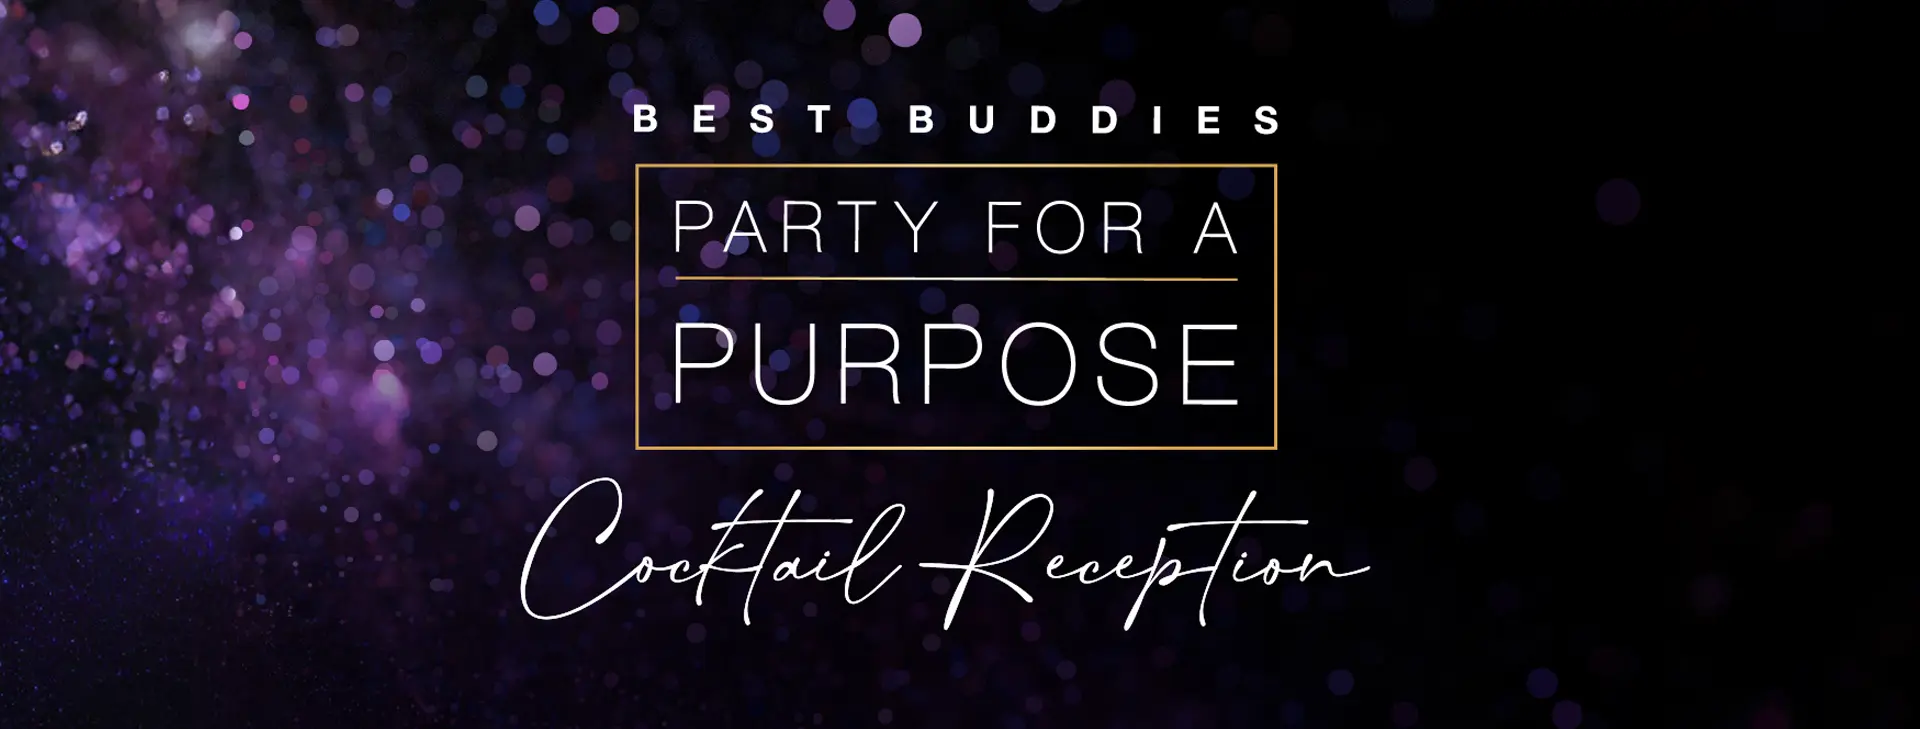 party for a purpose event logo